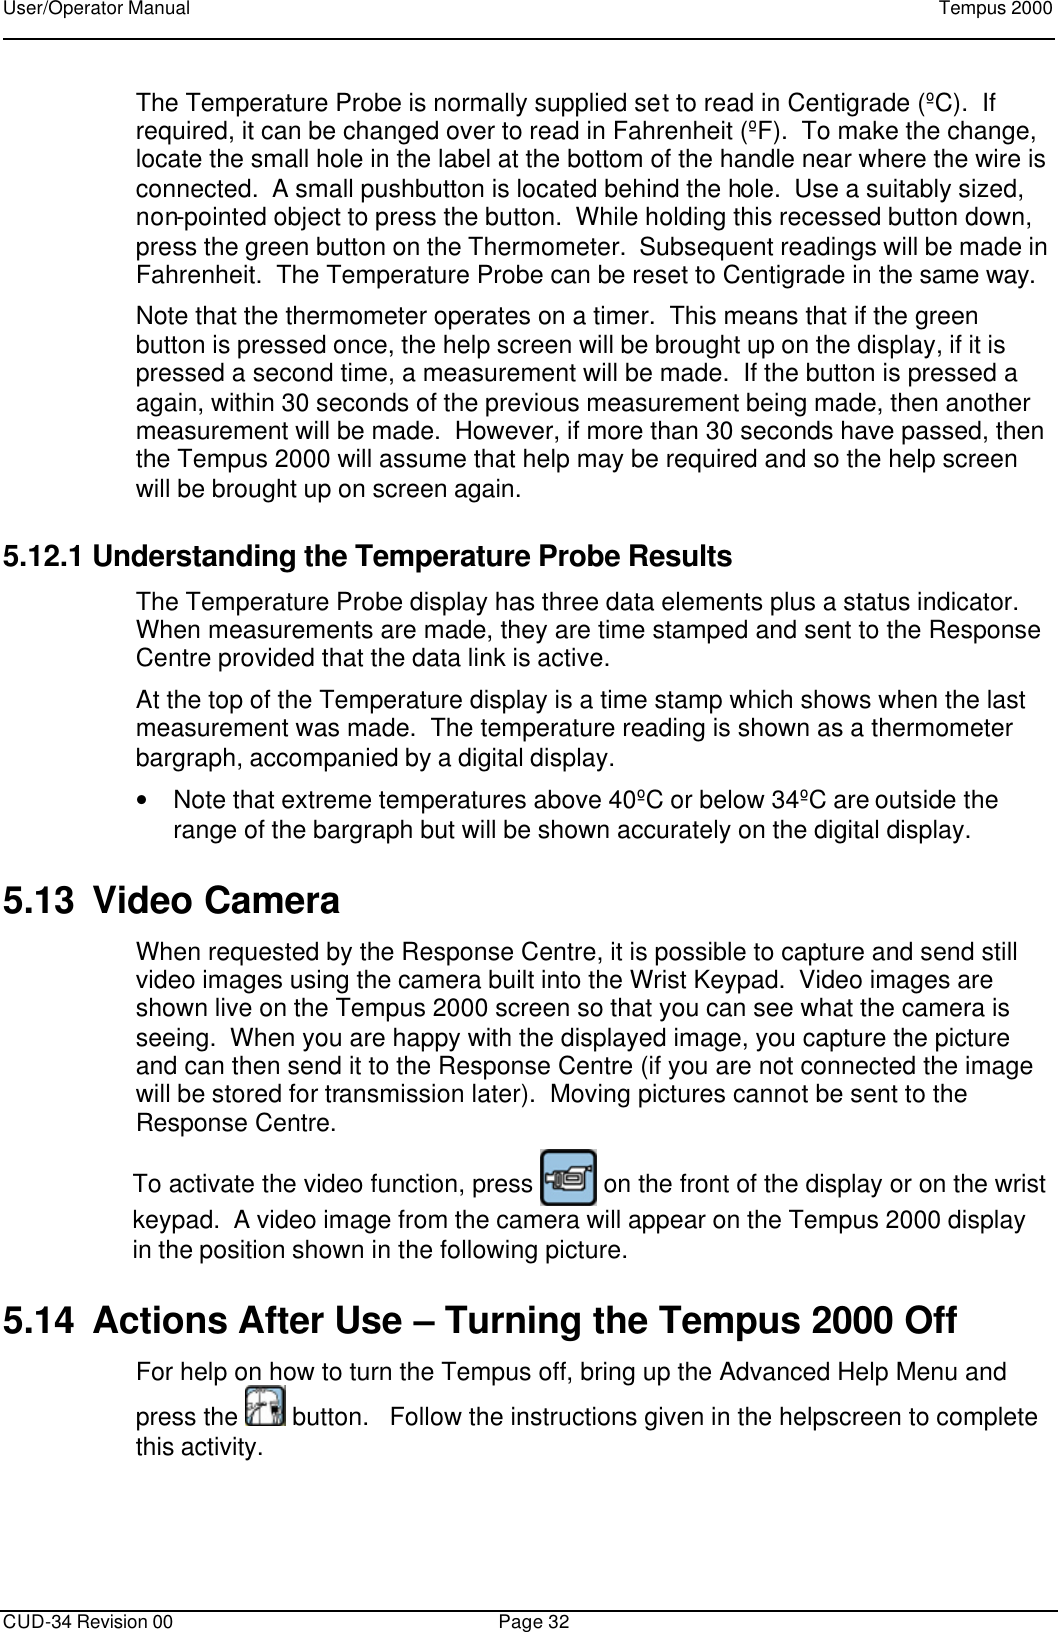 User/Operator Manual    Tempus 2000      CUD-34 Revision 00 Page 32  The Temperature Probe is normally supplied set to read in Centigrade (ºC).  If required, it can be changed over to read in Fahrenheit (ºF).  To make the change, locate the small hole in the label at the bottom of the handle near where the wire is connected.  A small pushbutton is located behind the hole.  Use a suitably sized, non-pointed object to press the button.  While holding this recessed button down, press the green button on the Thermometer.  Subsequent readings will be made in Fahrenheit.  The Temperature Probe can be reset to Centigrade in the same way. Note that the thermometer operates on a timer.  This means that if the green button is pressed once, the help screen will be brought up on the display, if it is pressed a second time, a measurement will be made.  If the button is pressed a again, within 30 seconds of the previous measurement being made, then another measurement will be made.  However, if more than 30 seconds have passed, then the Tempus 2000 will assume that help may be required and so the help screen will be brought up on screen again. 5.12.1 Understanding the Temperature Probe Results The Temperature Probe display has three data elements plus a status indicator.  When measurements are made, they are time stamped and sent to the Response Centre provided that the data link is active. At the top of the Temperature display is a time stamp which shows when the last measurement was made.  The temperature reading is shown as a thermometer bargraph, accompanied by a digital display. • Note that extreme temperatures above 40ºC or below 34ºC are outside the range of the bargraph but will be shown accurately on the digital display. 5.13 Video Camera When requested by the Response Centre, it is possible to capture and send still video images using the camera built into the Wrist Keypad.  Video images are shown live on the Tempus 2000 screen so that you can see what the camera is seeing.  When you are happy with the displayed image, you capture the picture and can then send it to the Response Centre (if you are not connected the image will be stored for transmission later).  Moving pictures cannot be sent to the Response Centre.    To activate the video function, press   on the front of the display or on the wrist keypad.  A video image from the camera will appear on the Tempus 2000 display in the position shown in the following picture.   5.14 Actions After Use – Turning the Tempus 2000 Off For help on how to turn the Tempus off, bring up the Advanced Help Menu and press the   button.   Follow the instructions given in the helpscreen to complete this activity.  